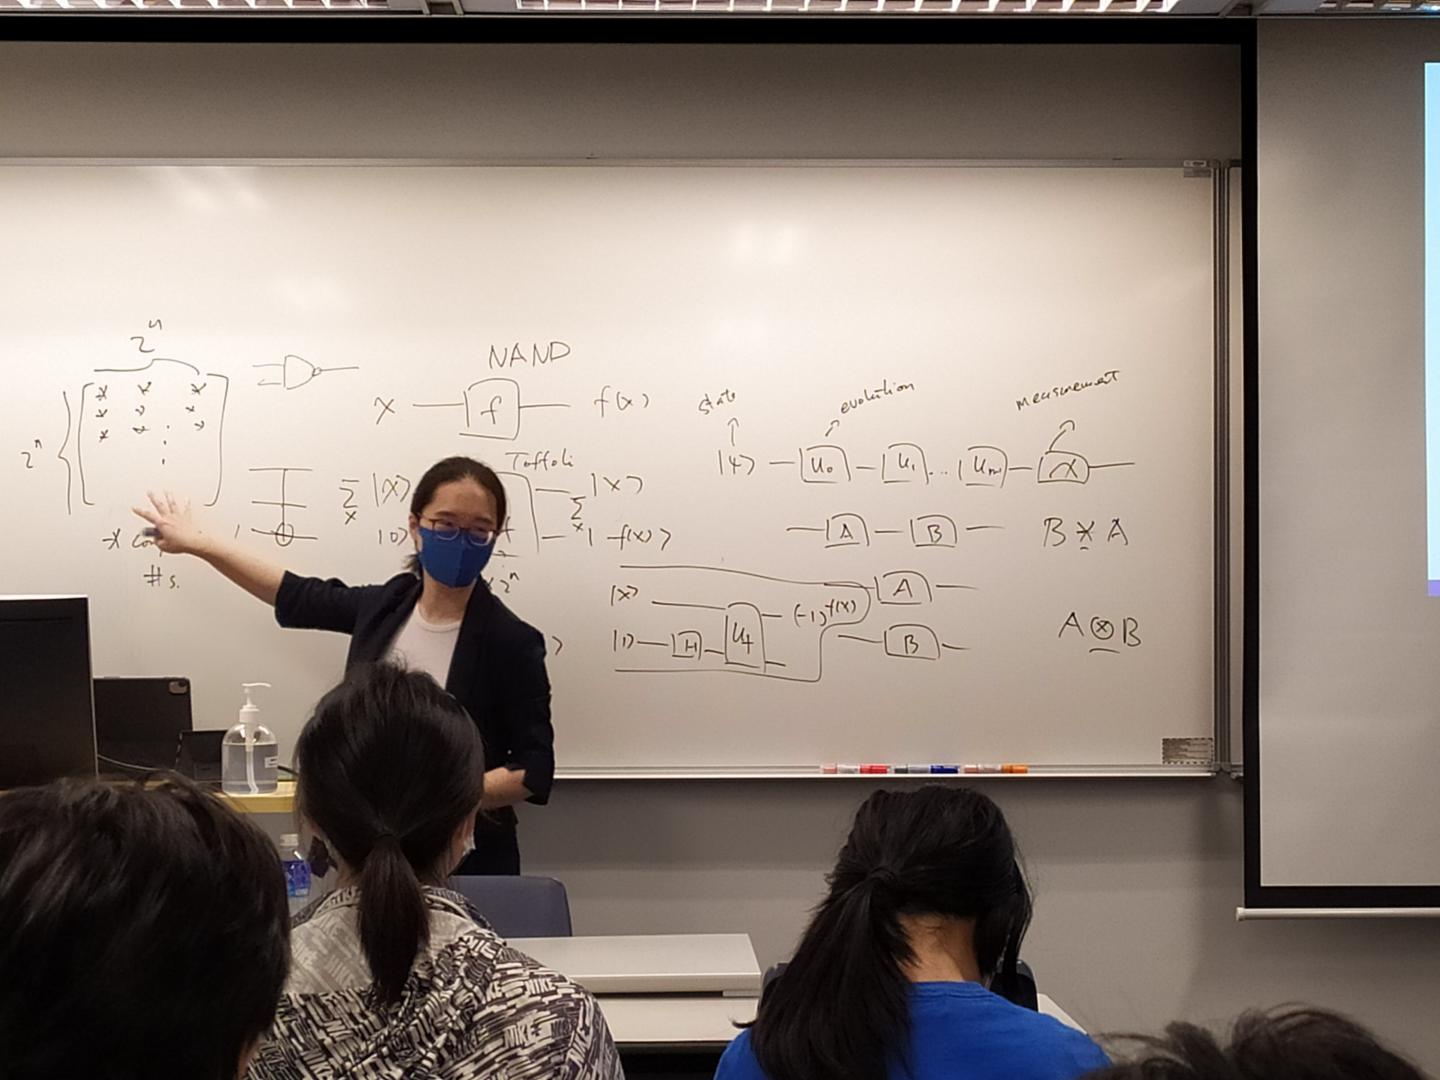 To promote greater understanding of quantum technologies among students, Prof. Zeng teaches local secondary students basic quantum theories.